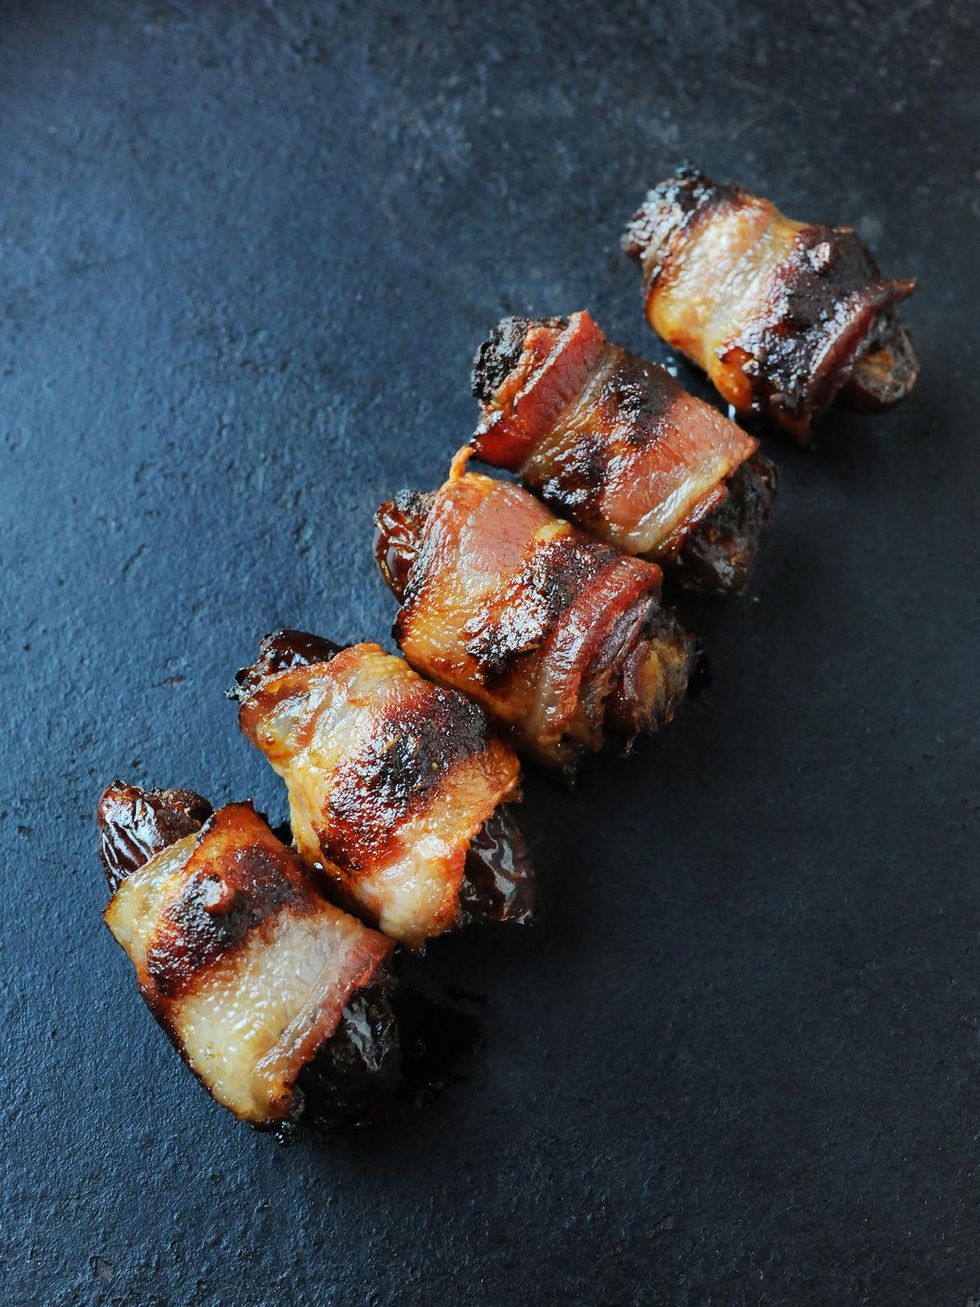 Sparrow Bar + Cookshop dates stuffed with chorrizo wrapped in bacon November 2013 Thanksgiving